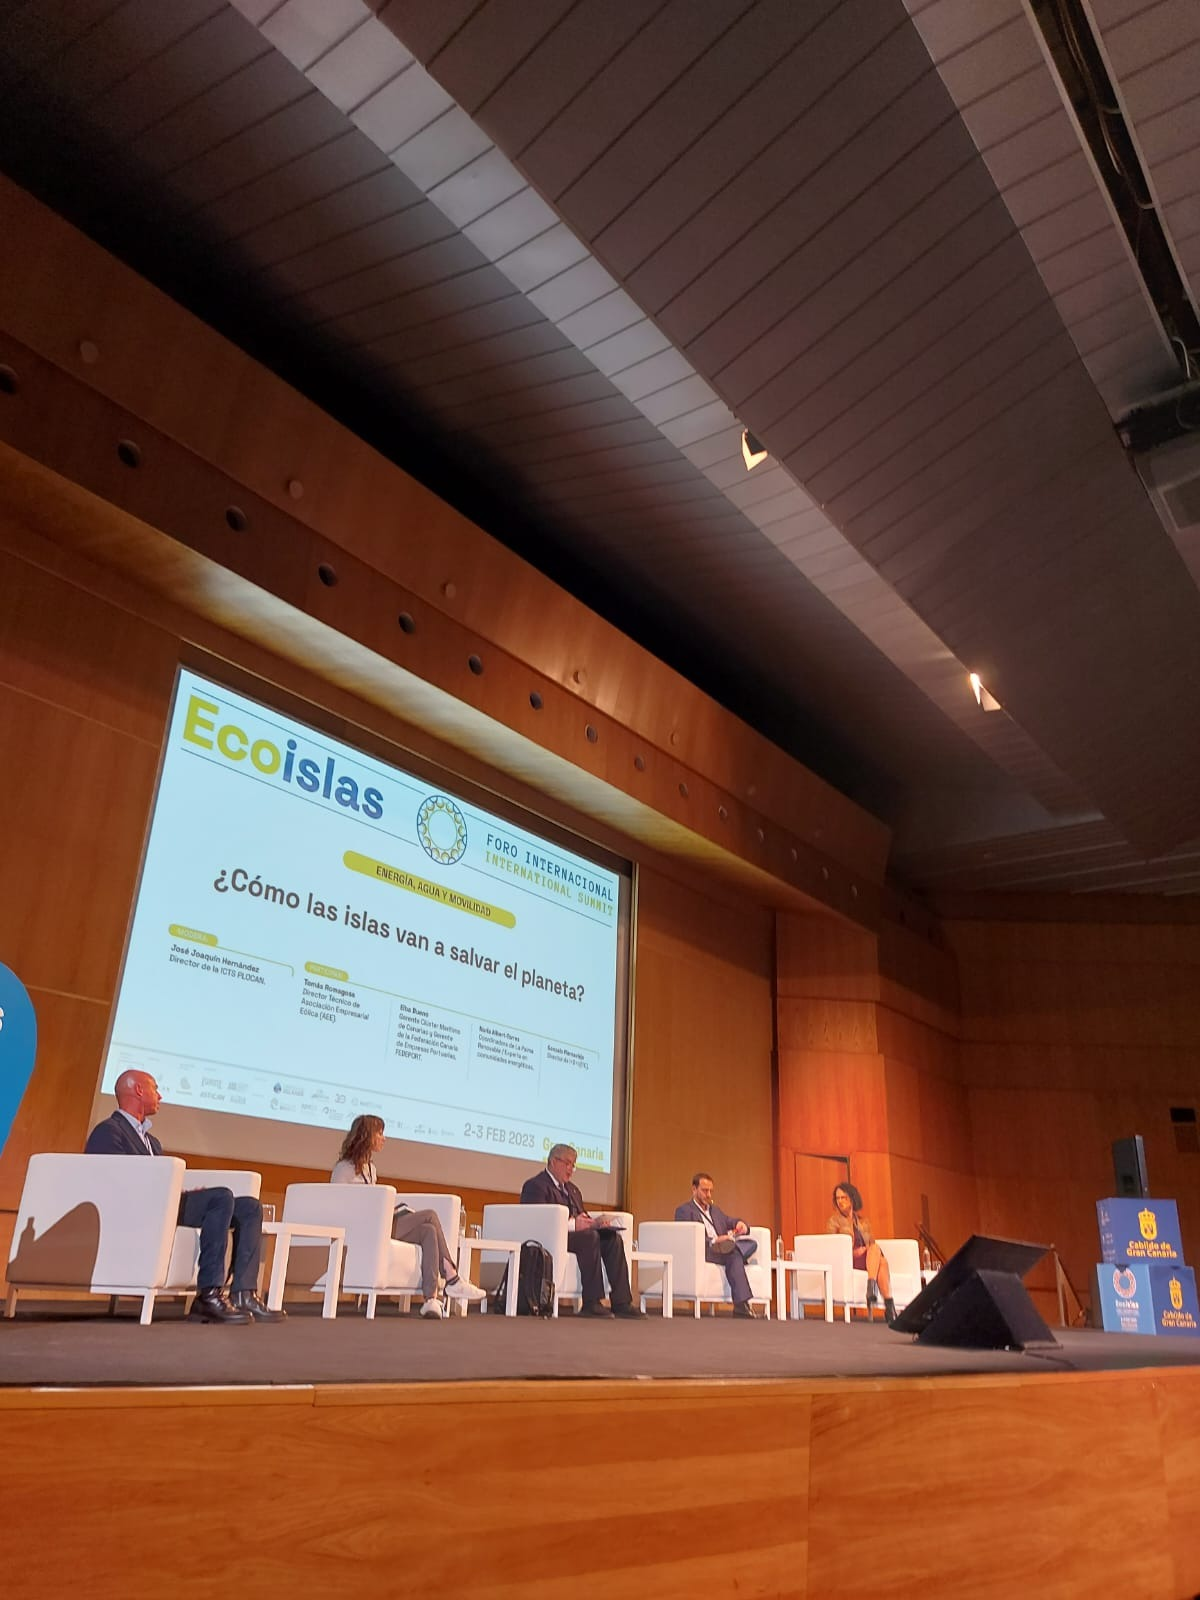 Canary Islands as a testsite for marine renewable energies in the Ecoislas forum